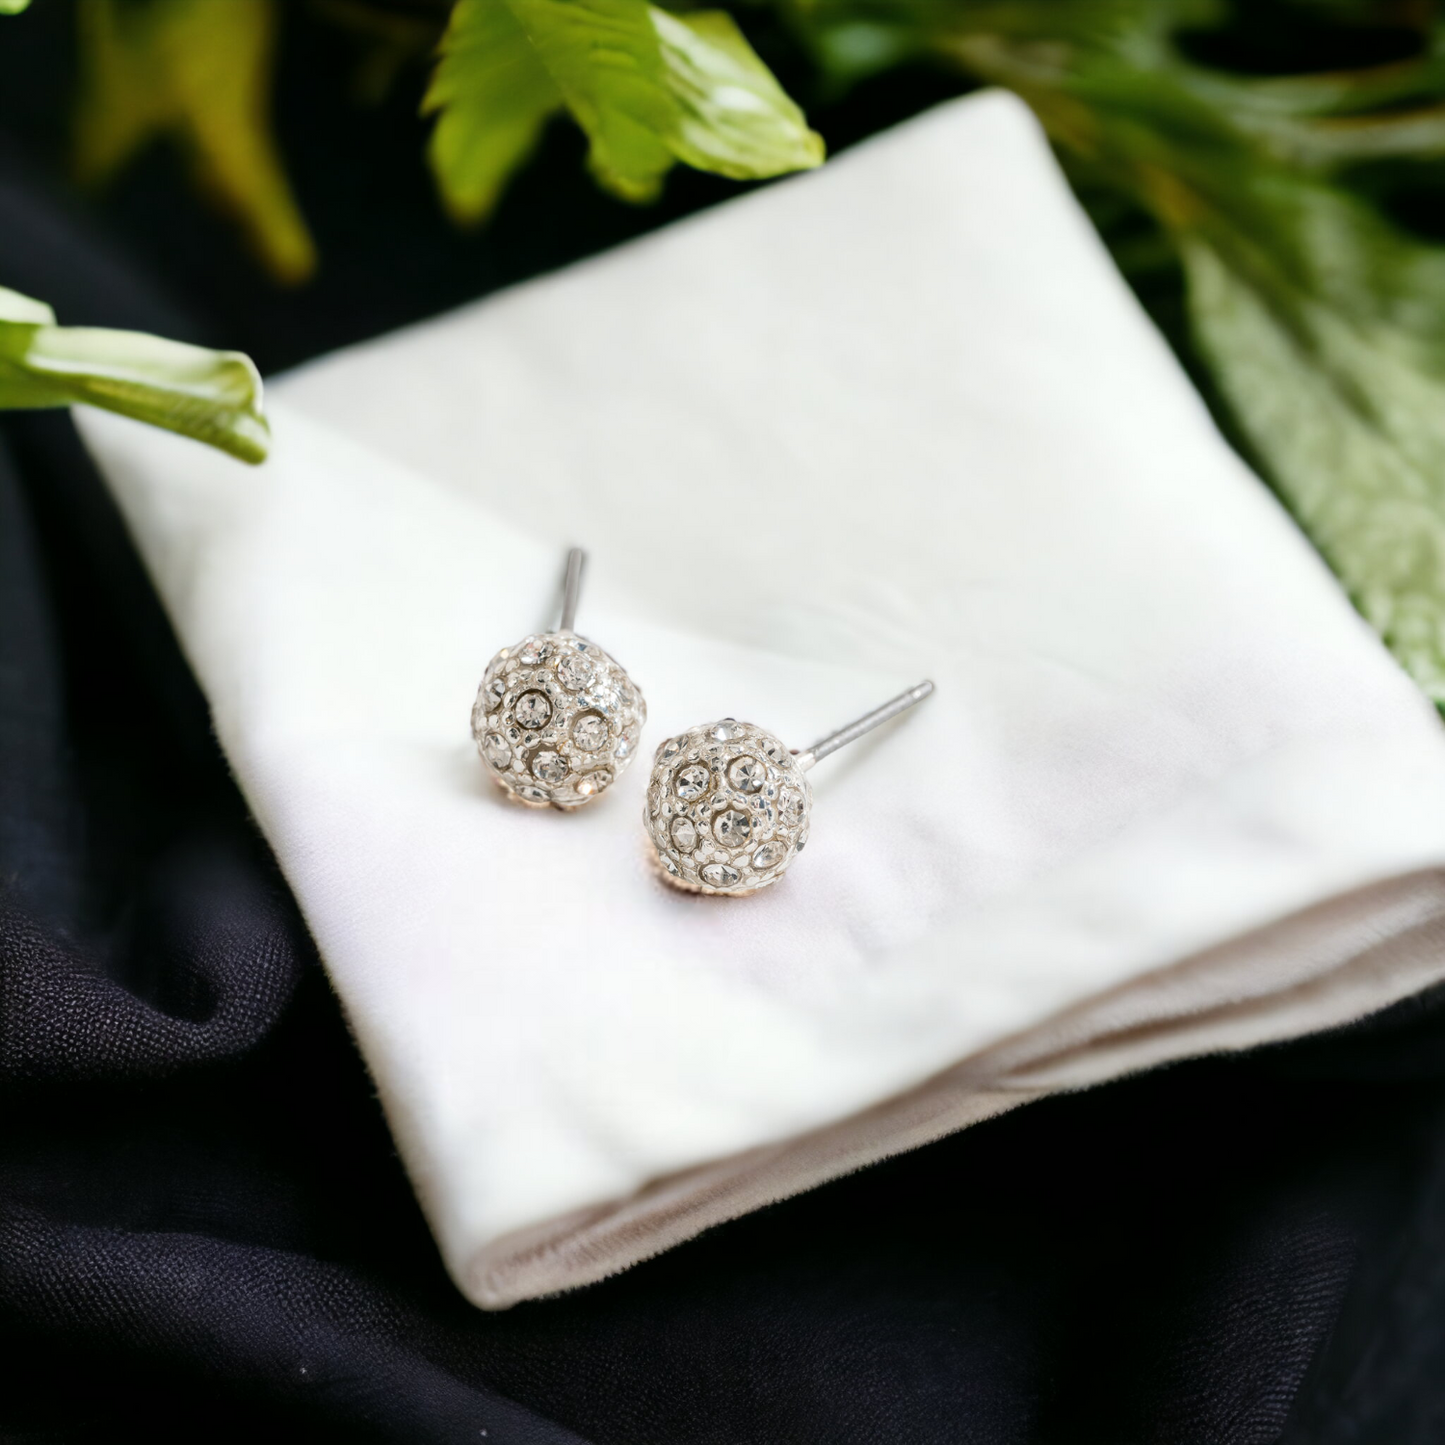 Silver Pave Stone Ball Stud Earrings